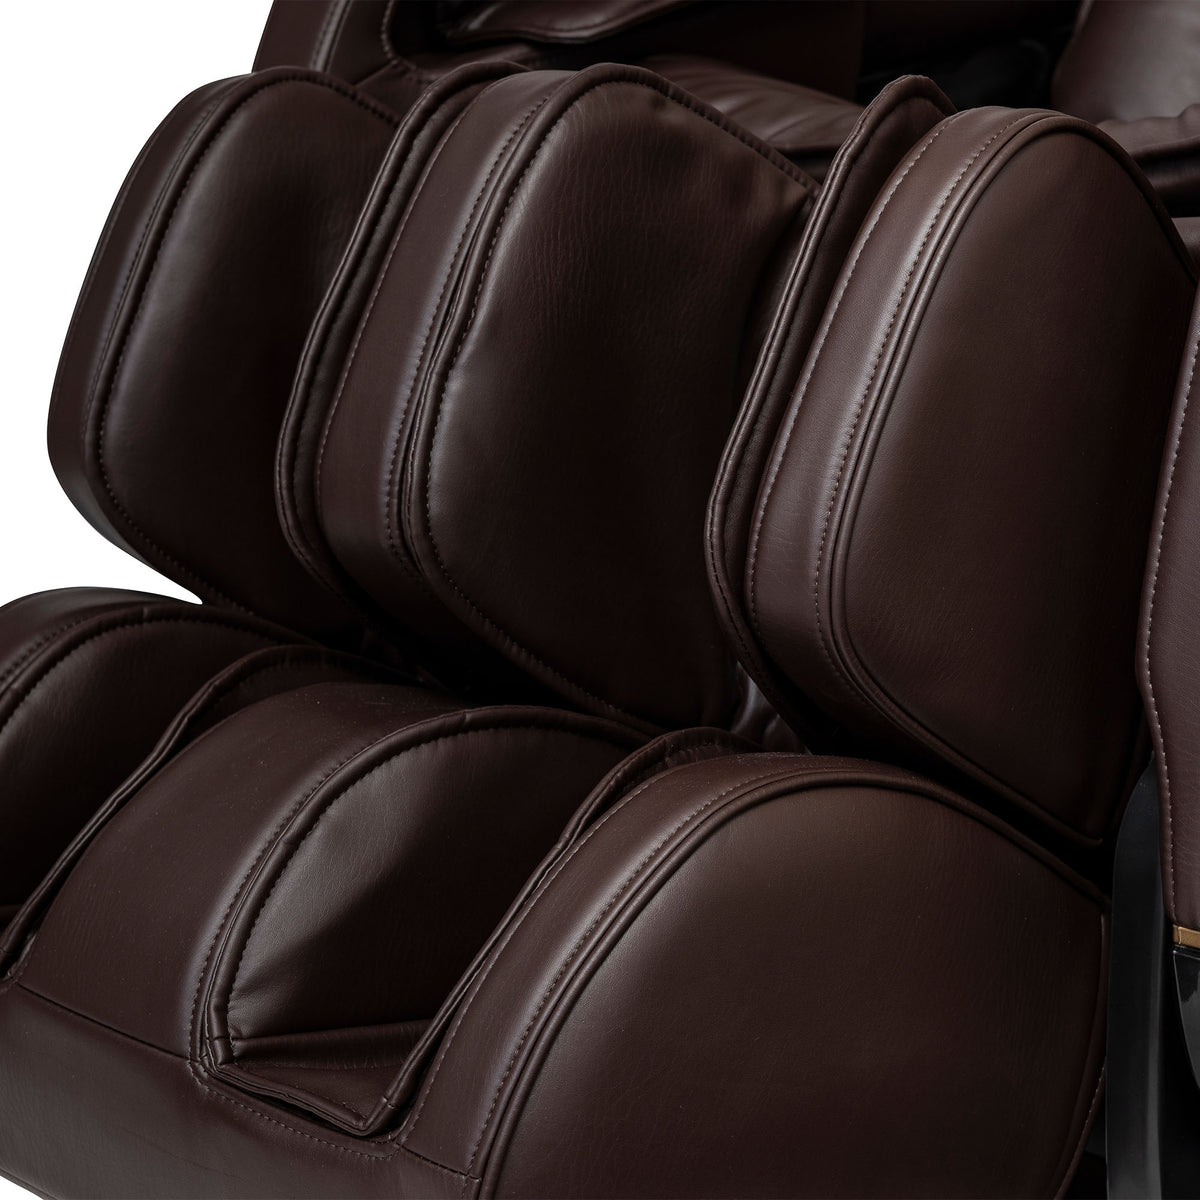 Thick cushioned massage seating positions showcased on a brown leather Inner Balance Wellness Jin 2.0 Massage Chair